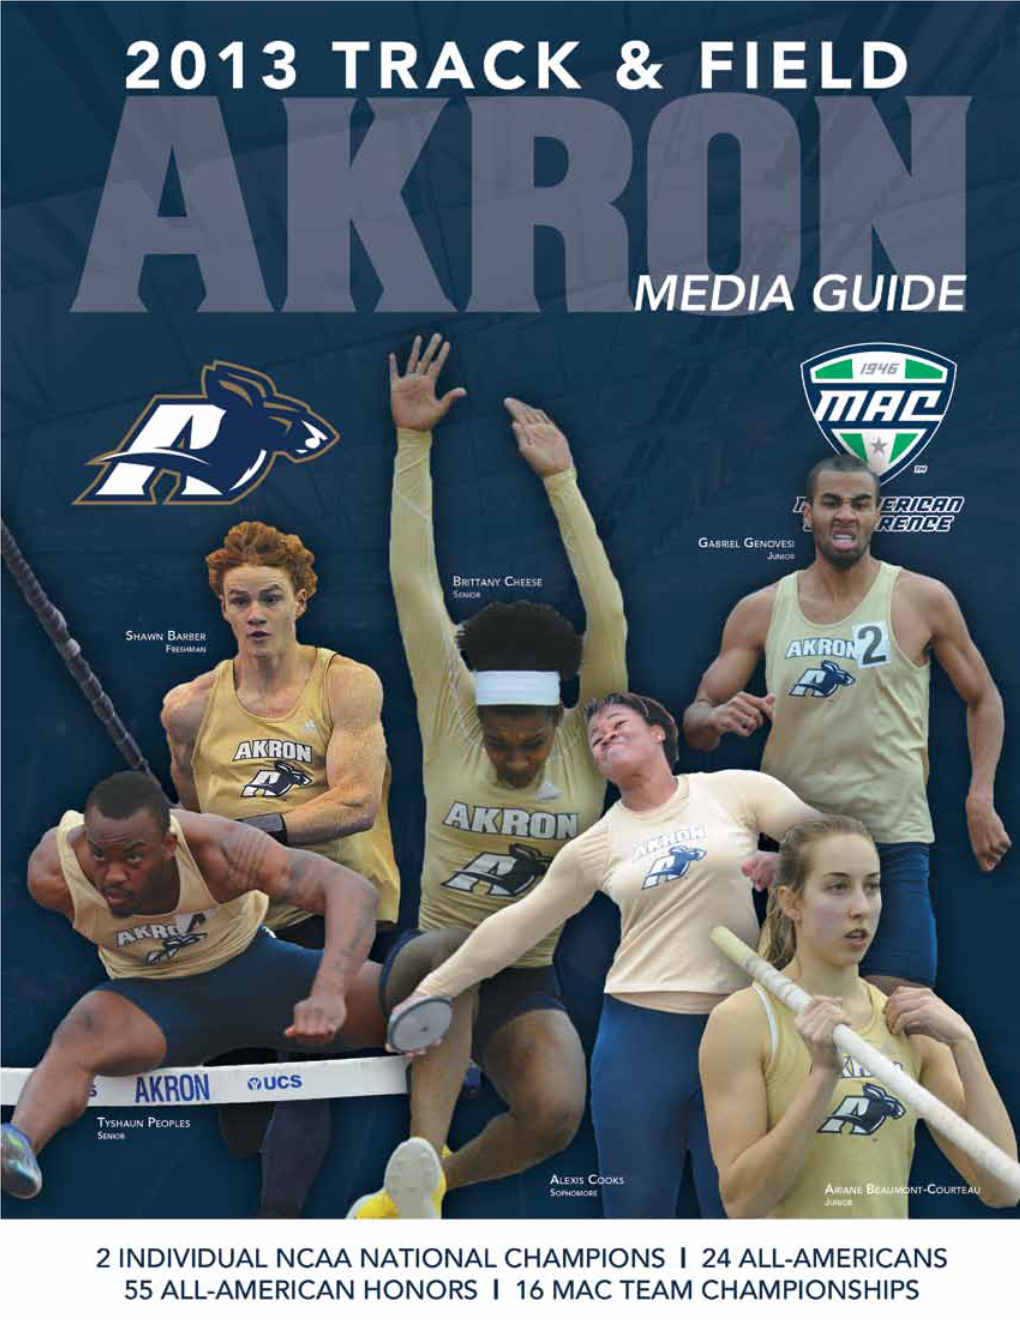 Akron Zips Table of Contents